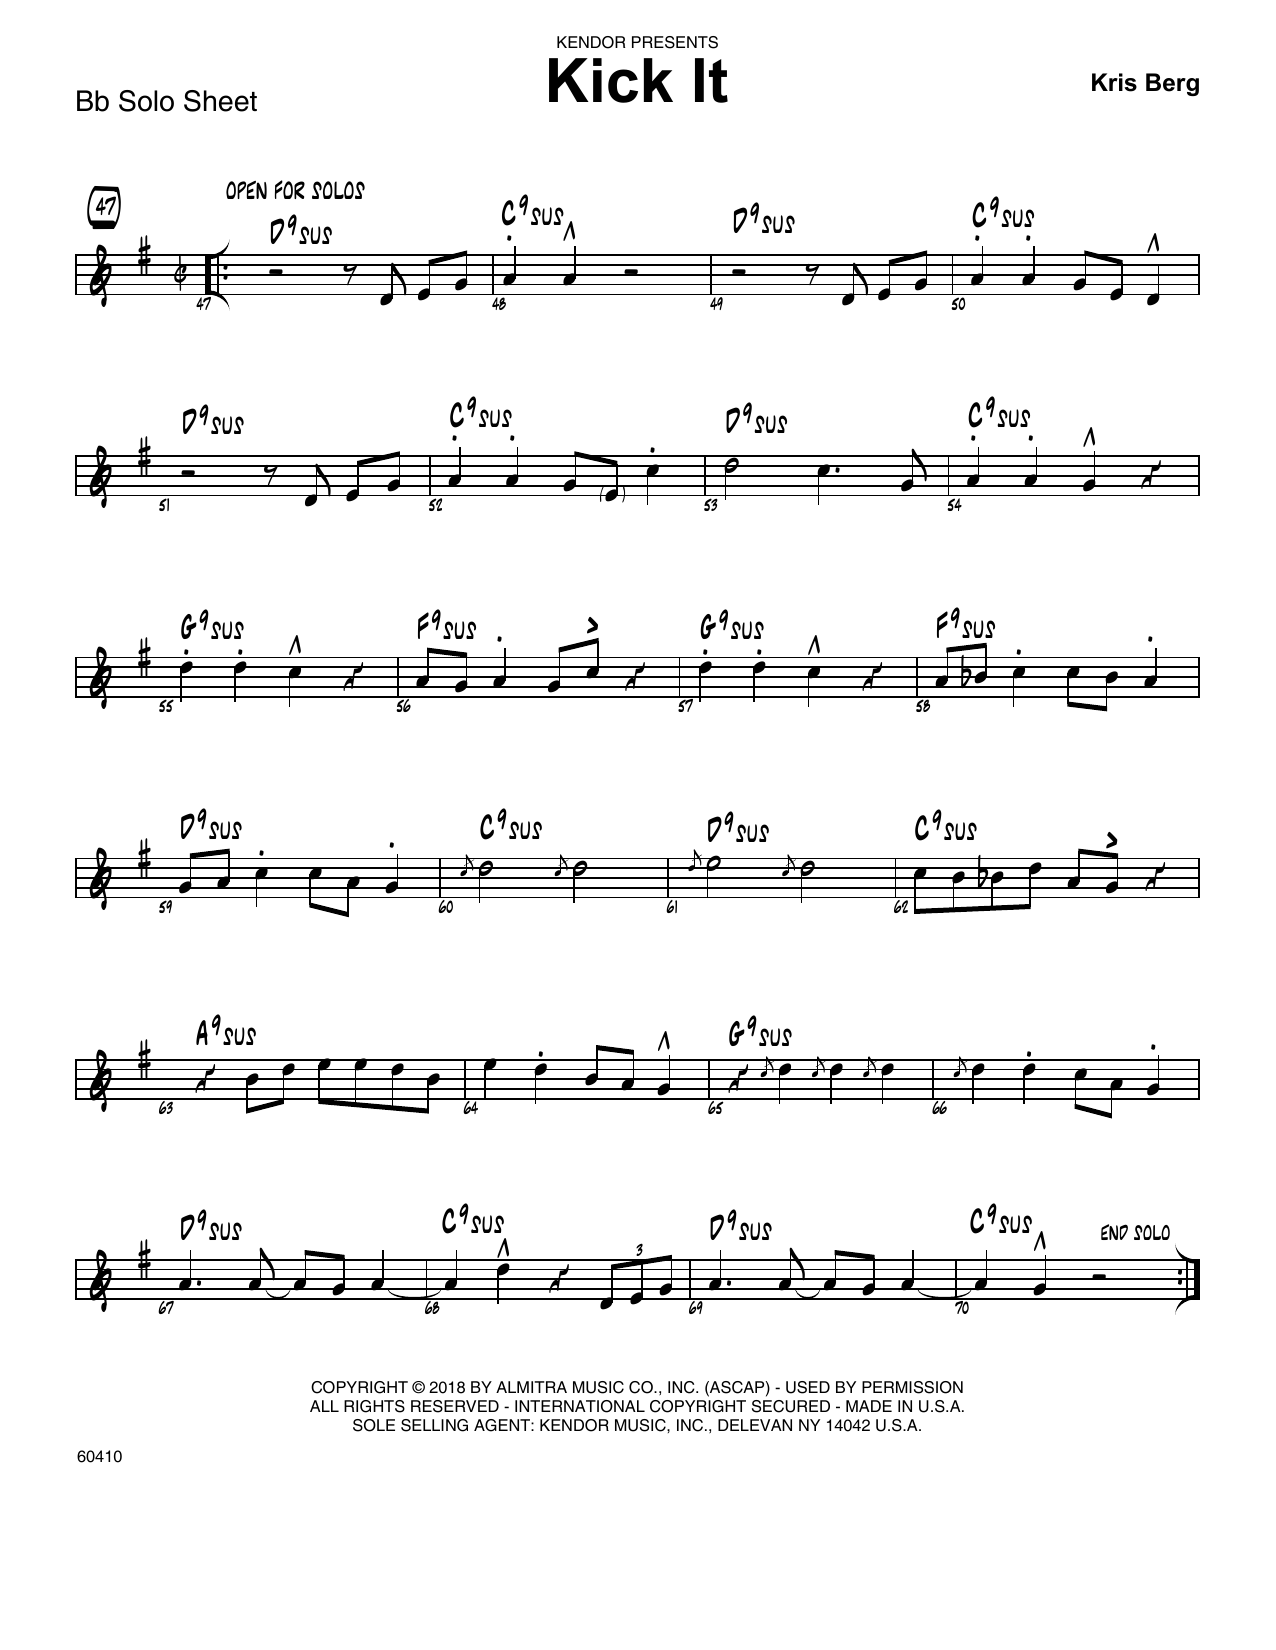 Kris Berg Kick It - Solo Sheet - Tenor Sax sheet music preview music notes and score for Jazz Ensemble including 2 page(s)